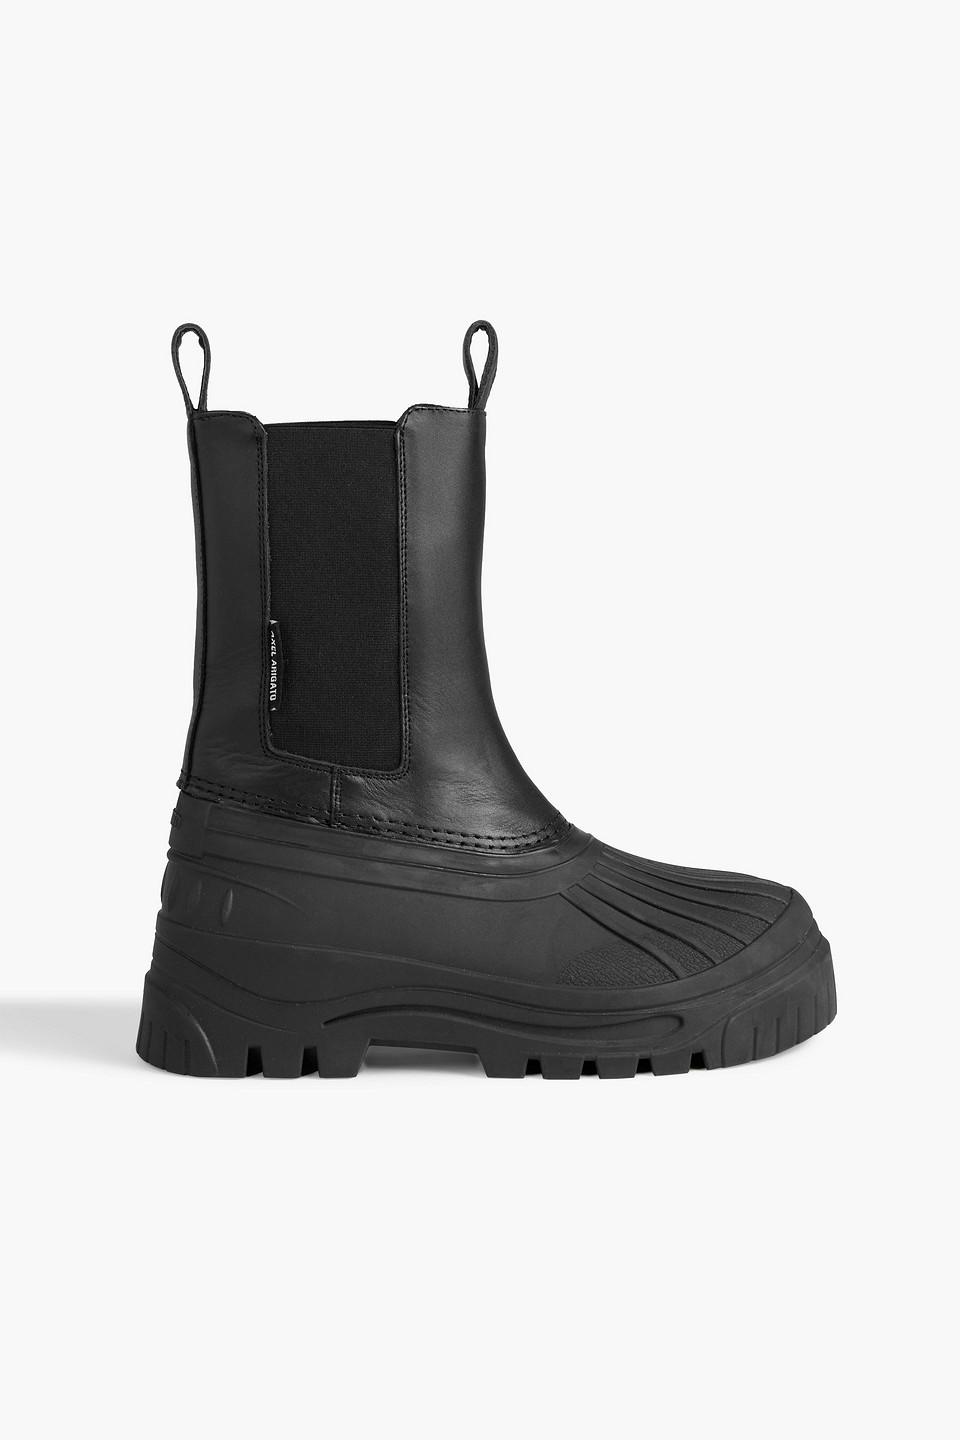 Axel Arigato Cryo Leather And Rubber Rain Boots in Black | Lyst